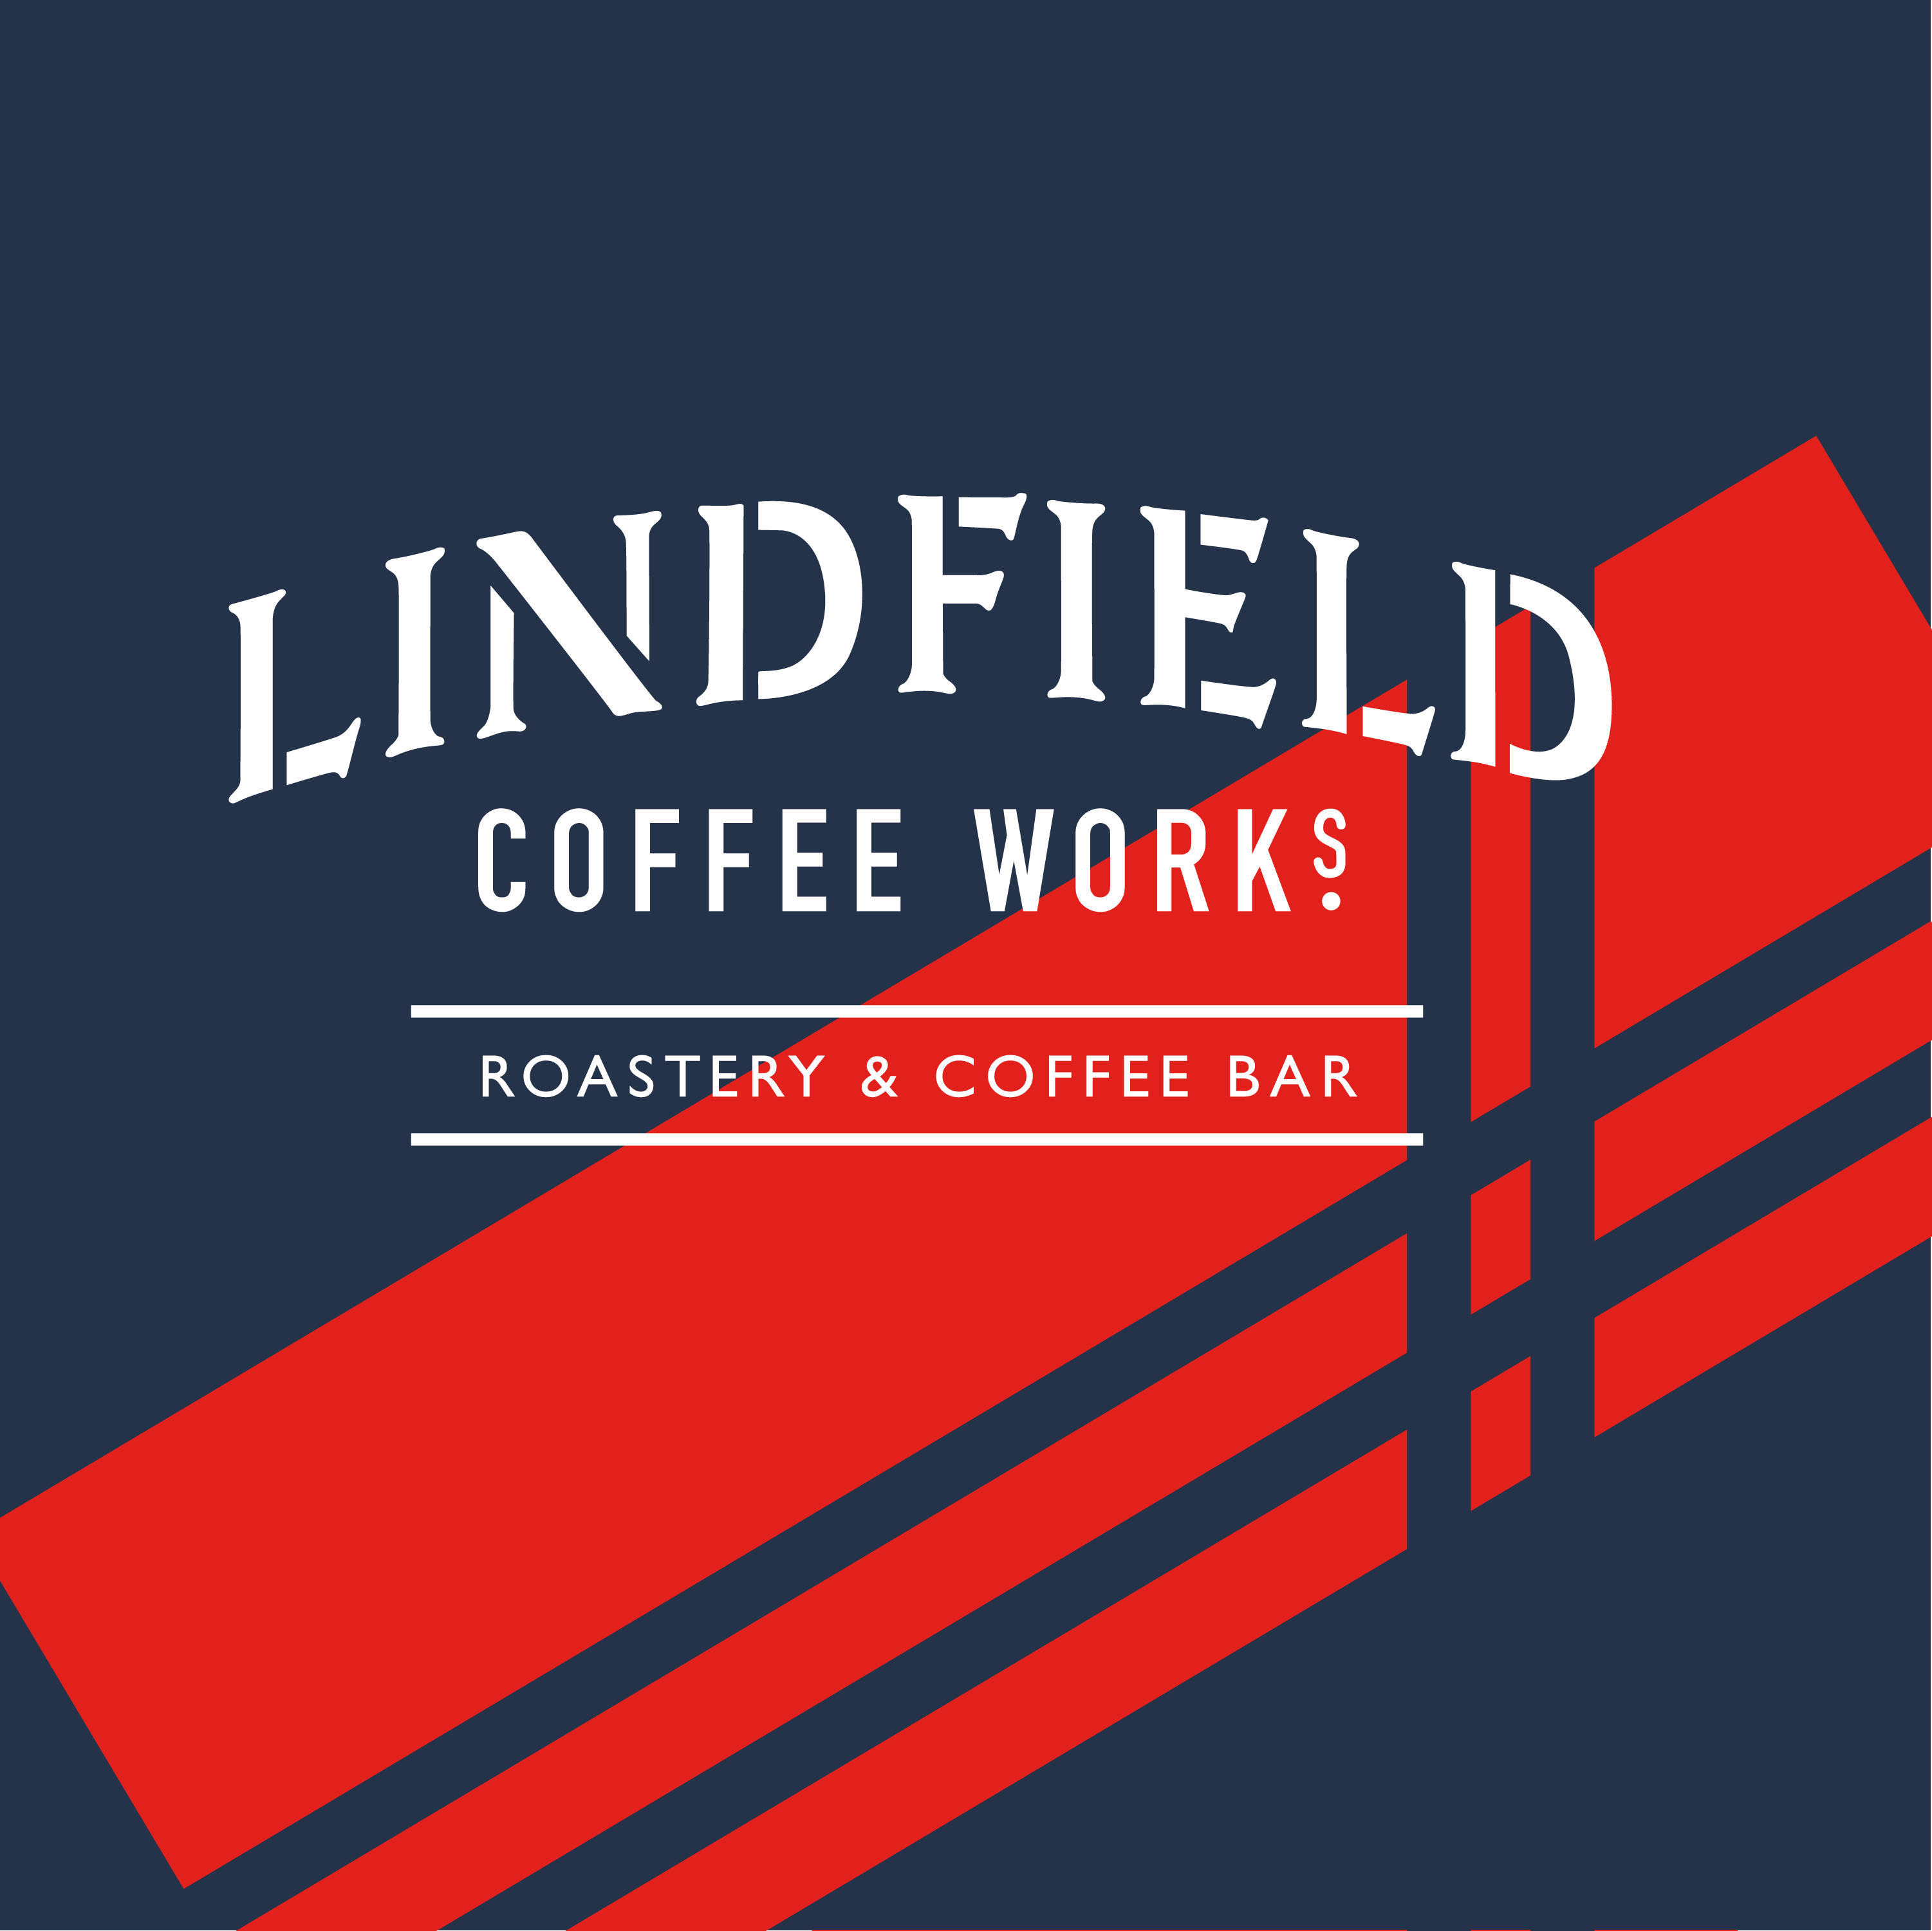 Club Image for LINDFIELD COFFEE WORKS